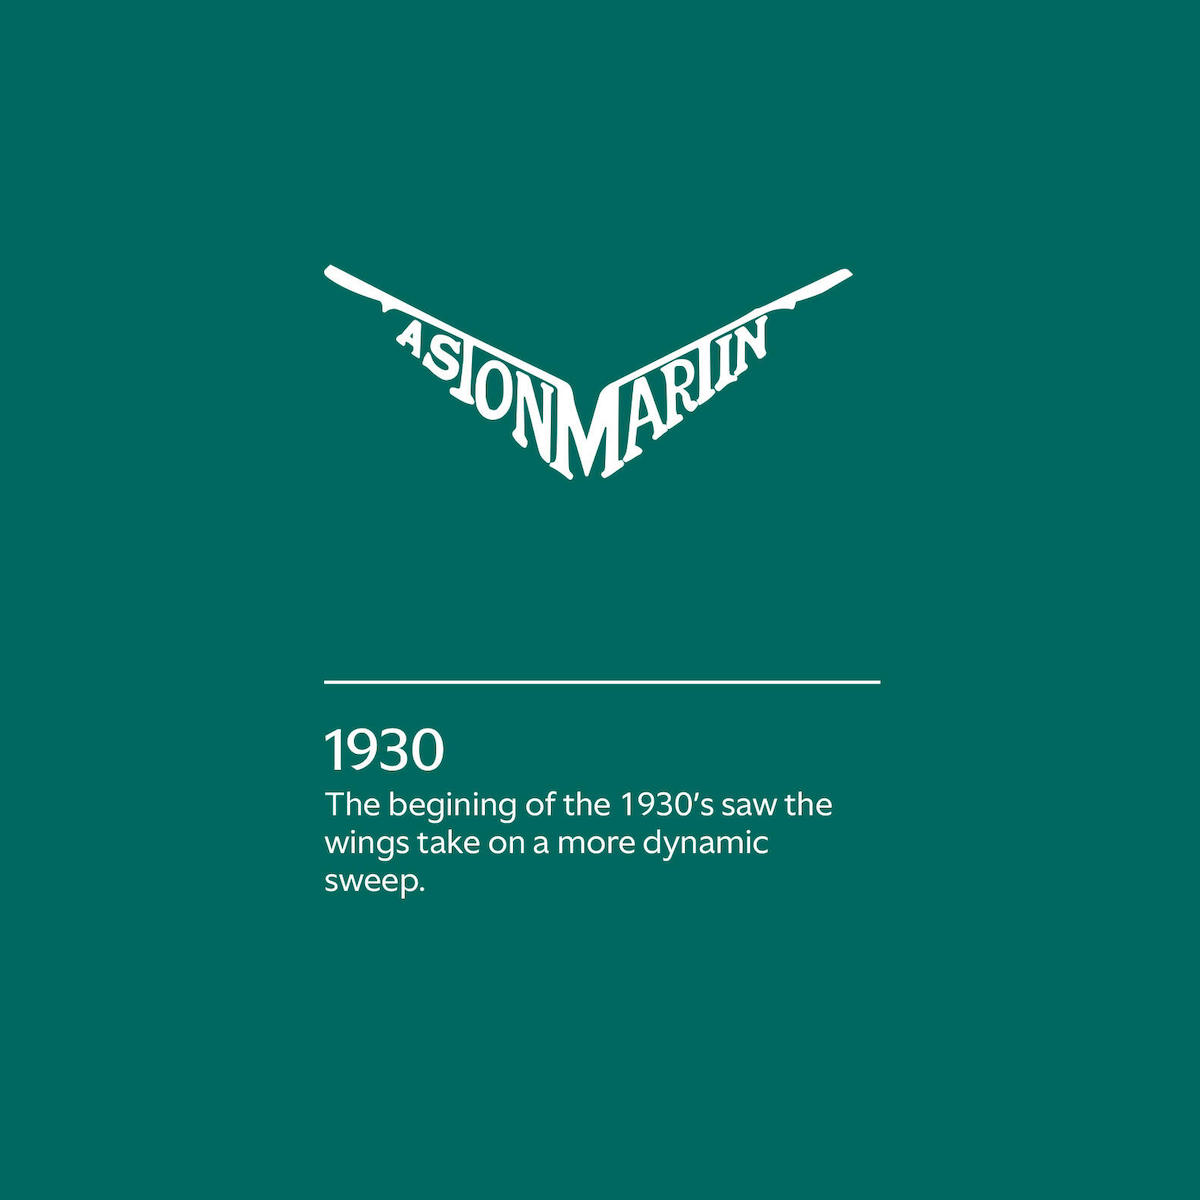 The 1930 version of the Aston Martin wings logo